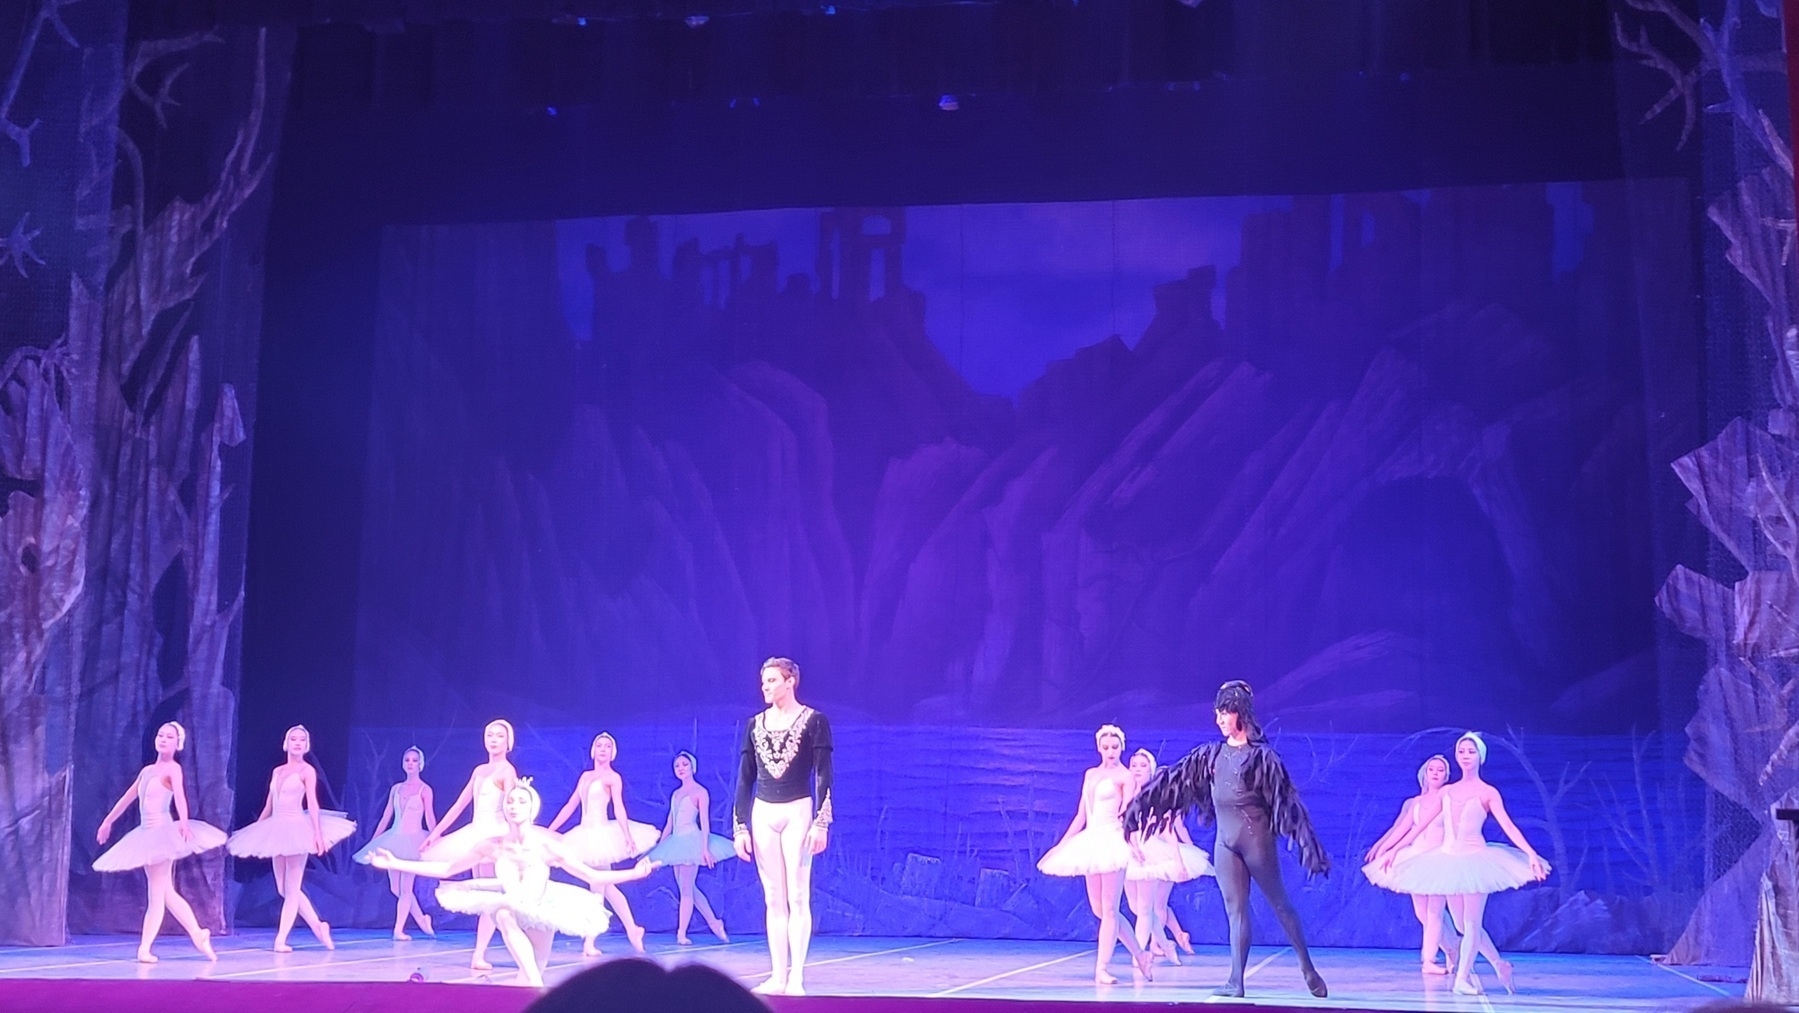 11 female ballerinas in white tutus on stage with 2 male ballet dancers, one a protagonist and one an antagonist (wearing all black)